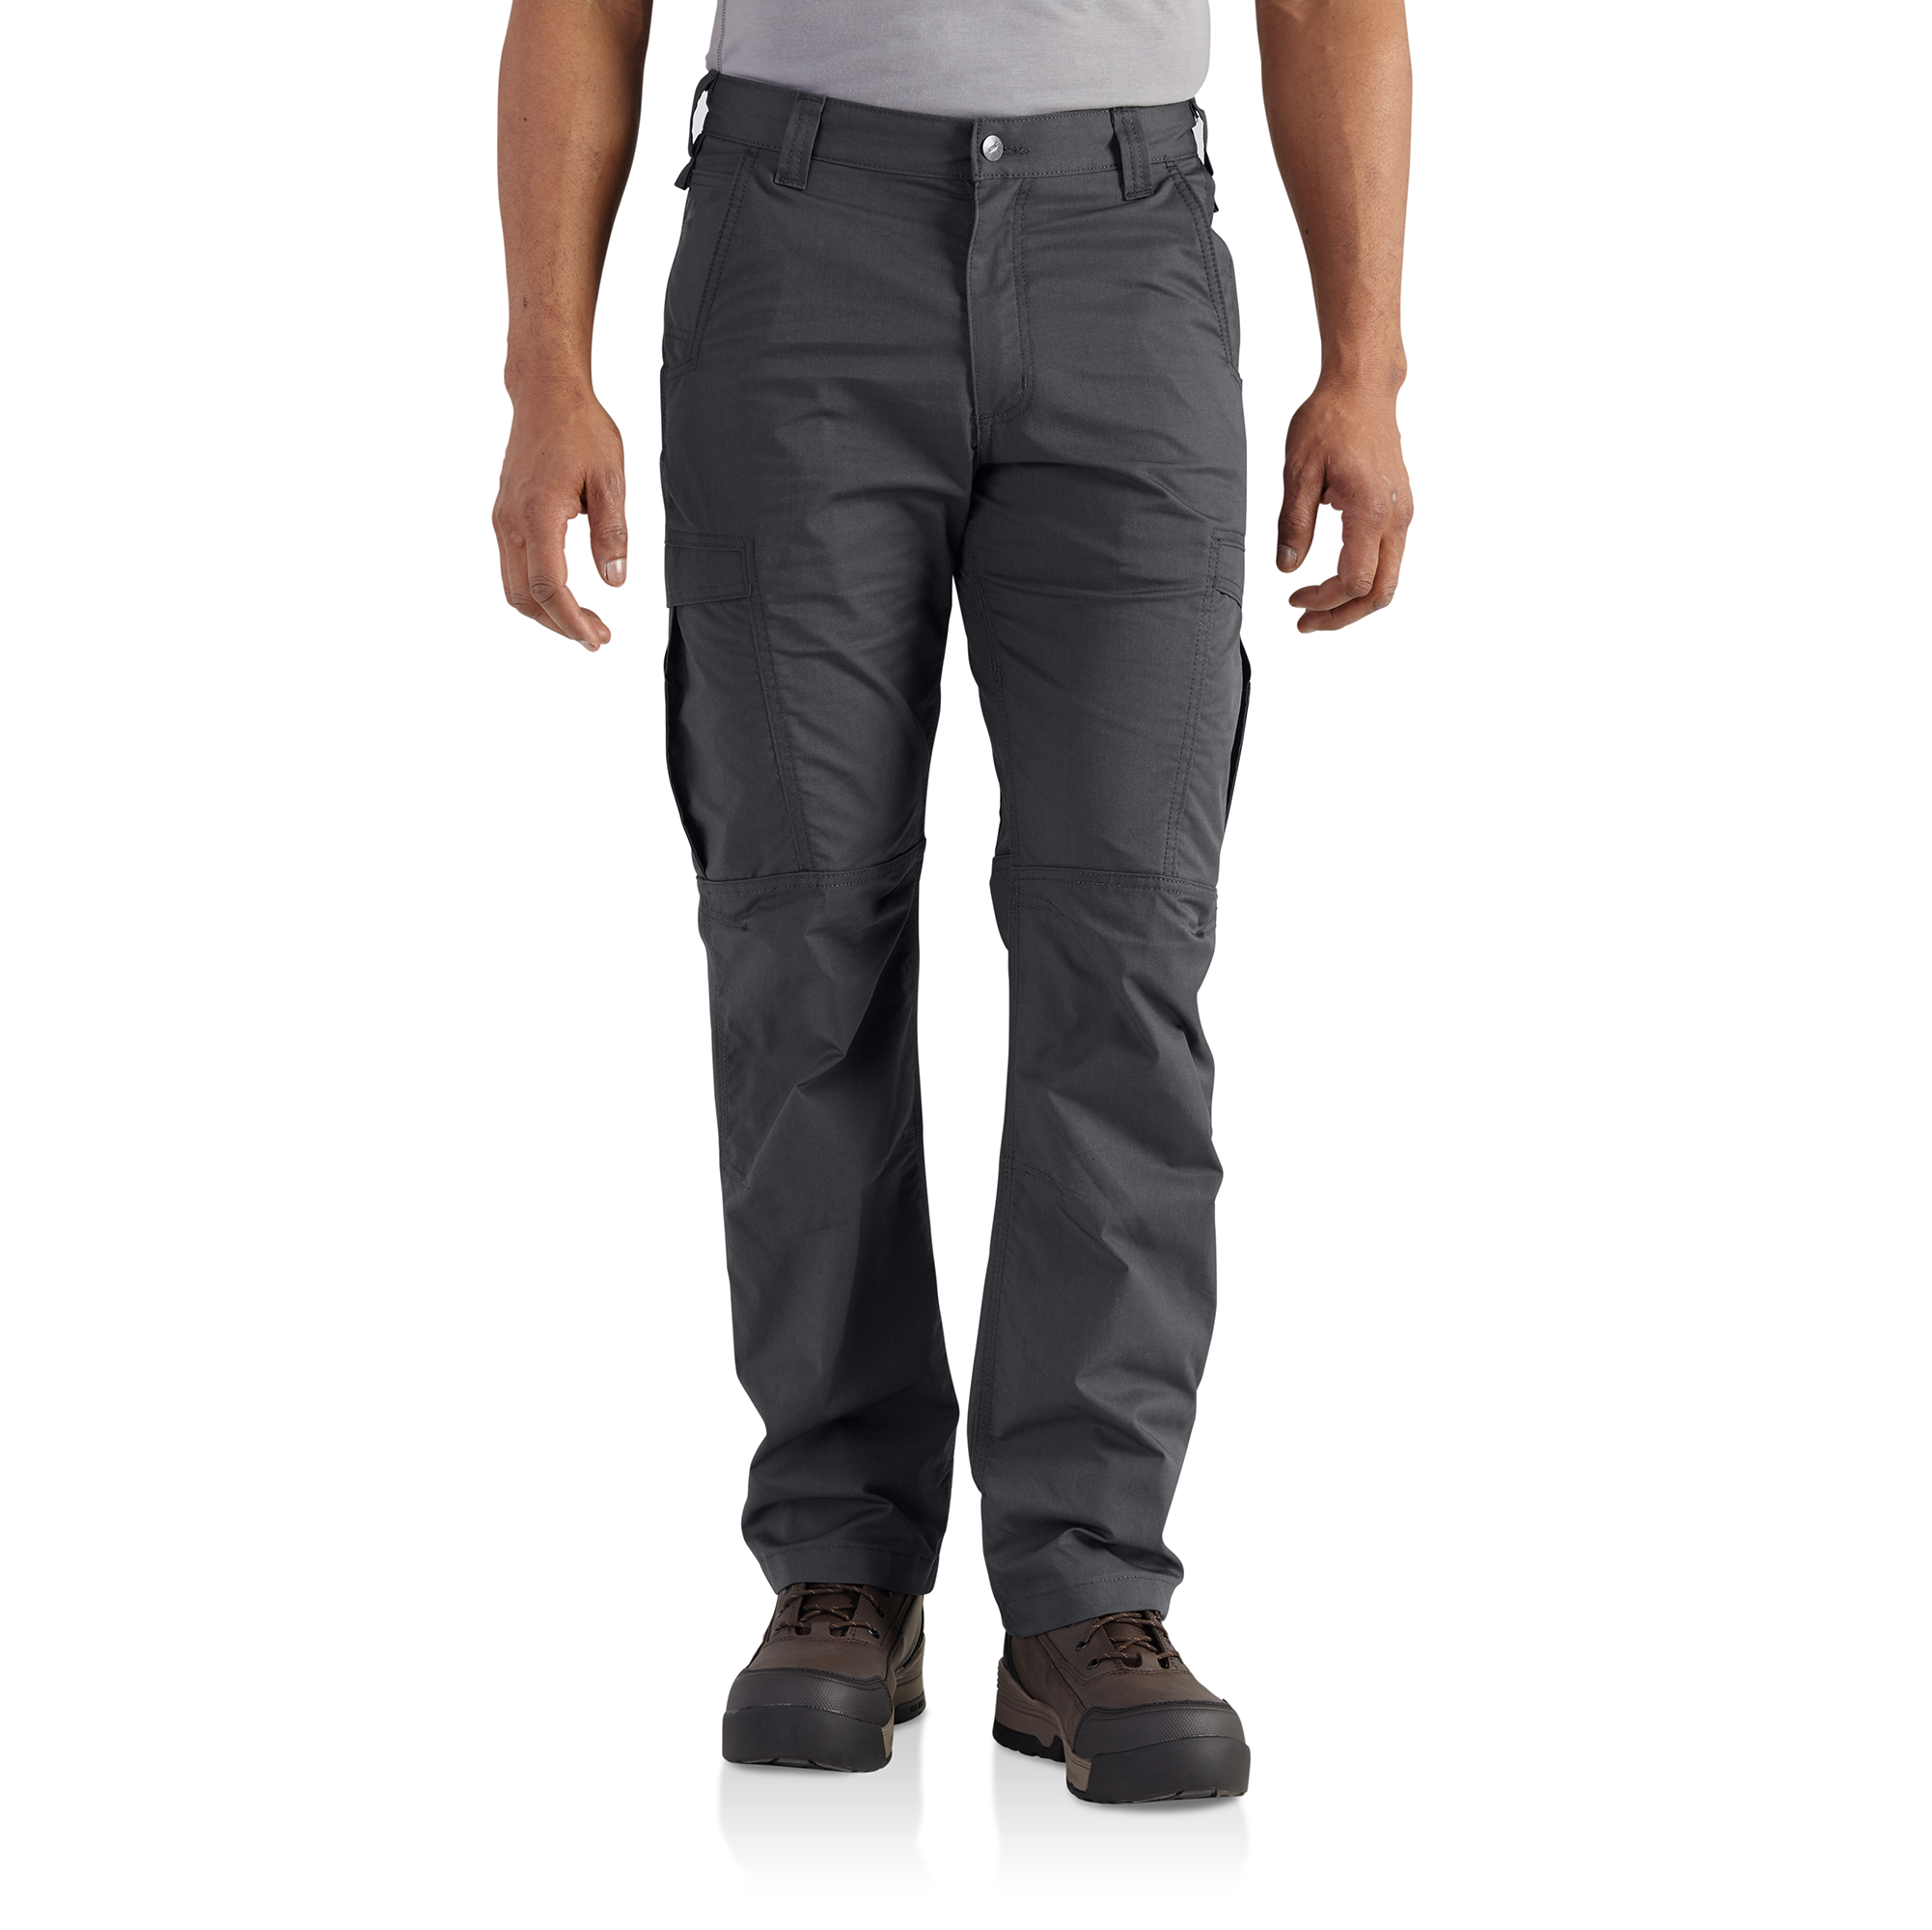 Murdoch's – Carhartt - Men's Force Extremes Cargo Pant